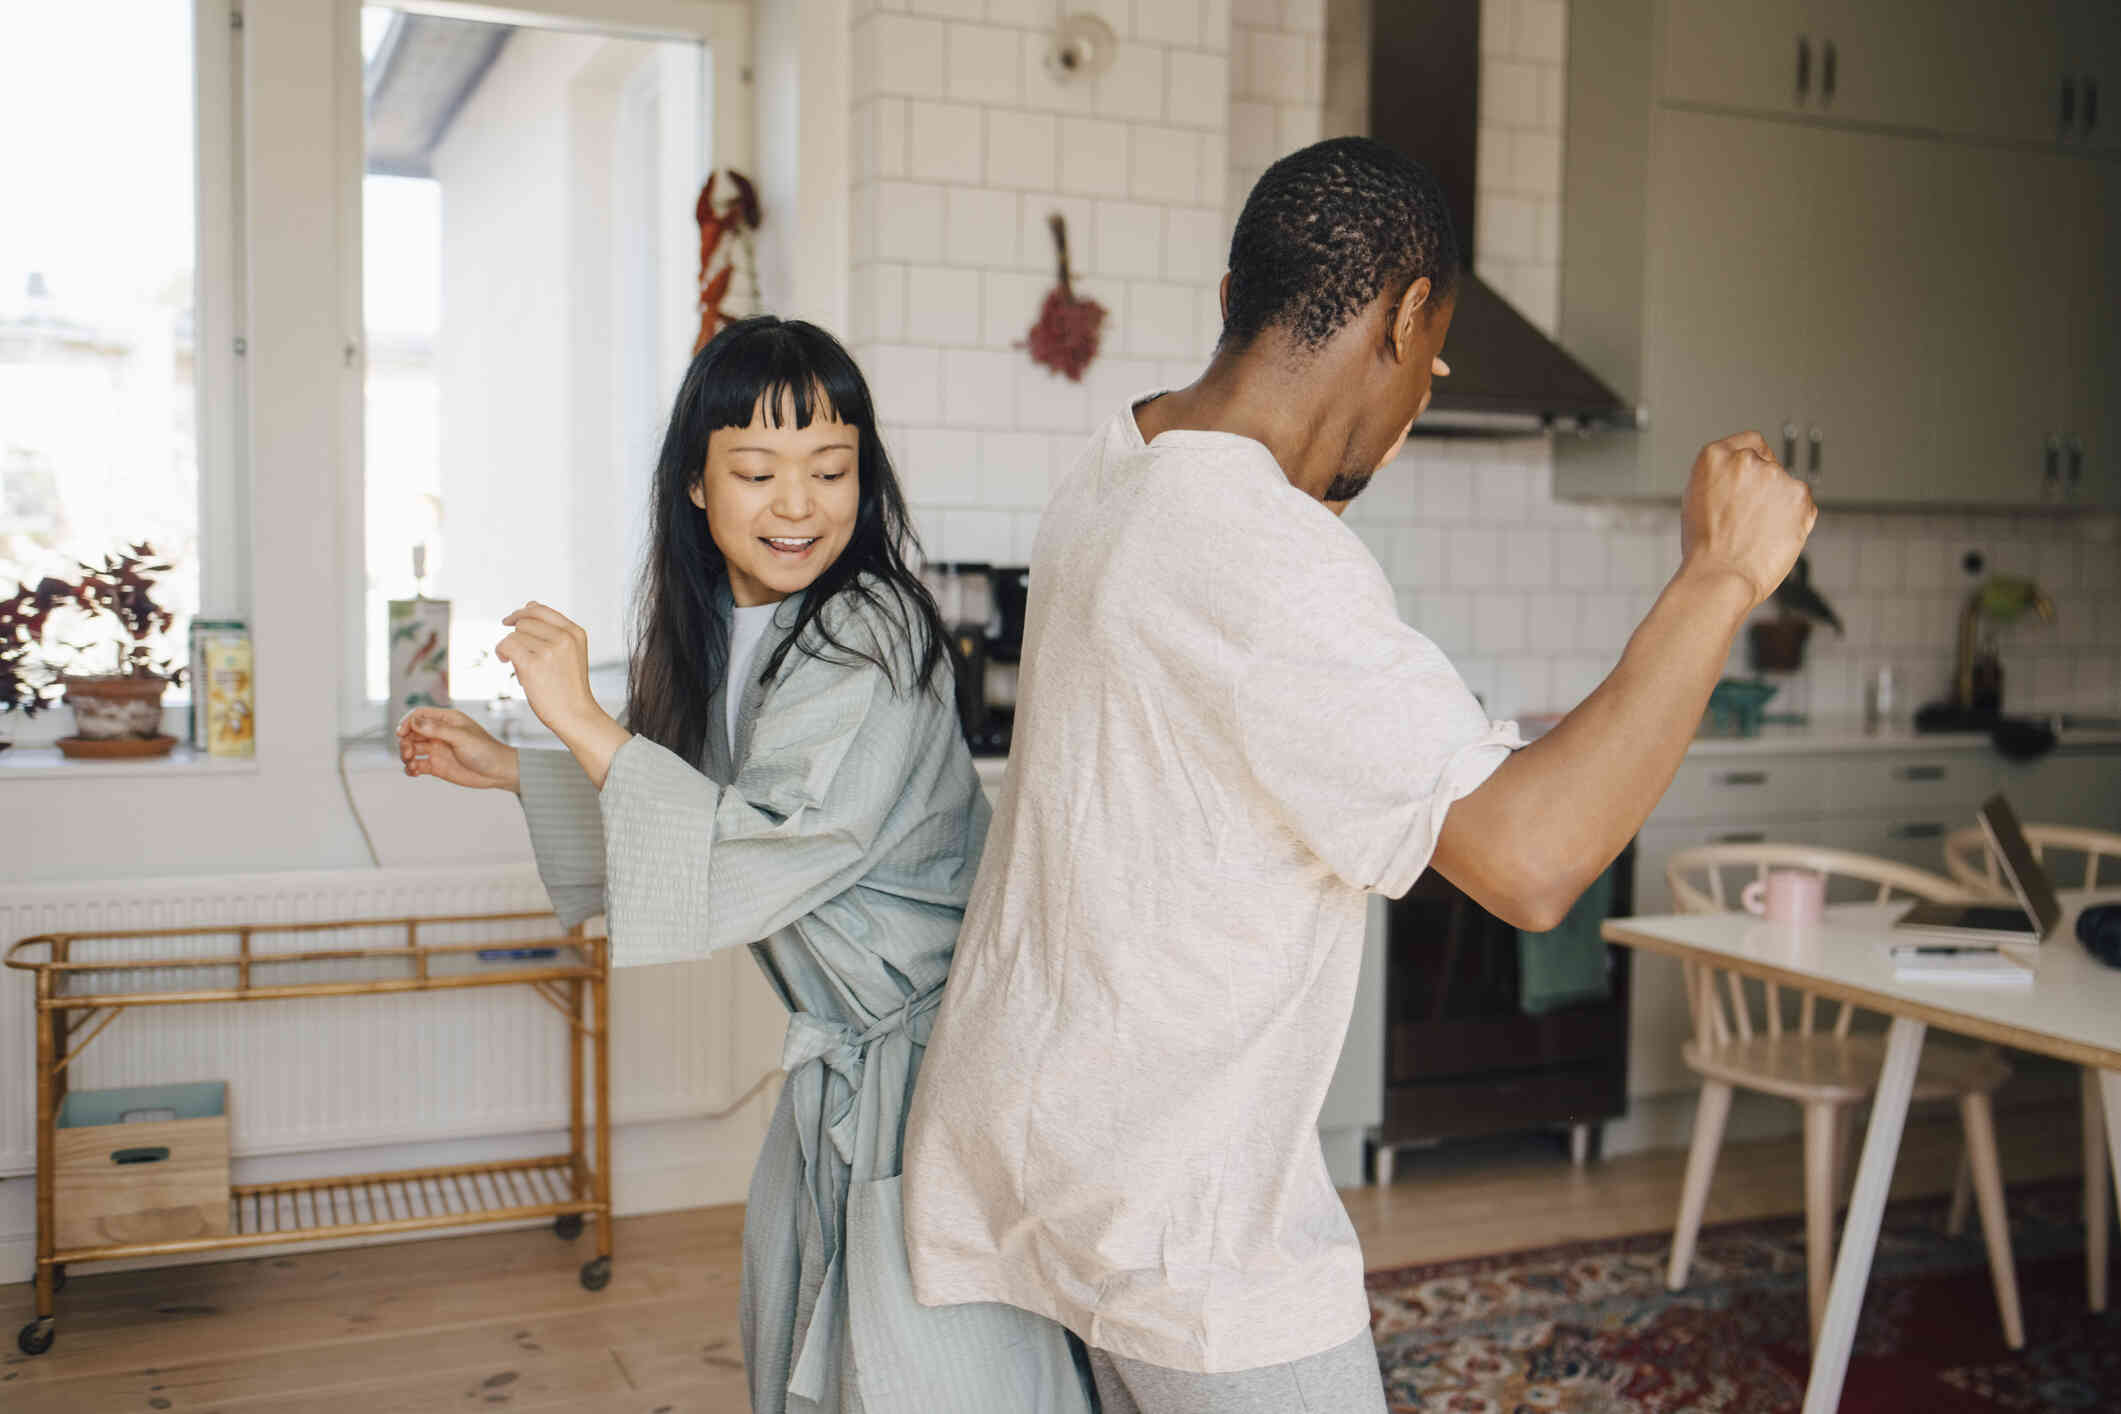 A male and female couple in pajamas dance together in the livingroom early in the morning with smiles.